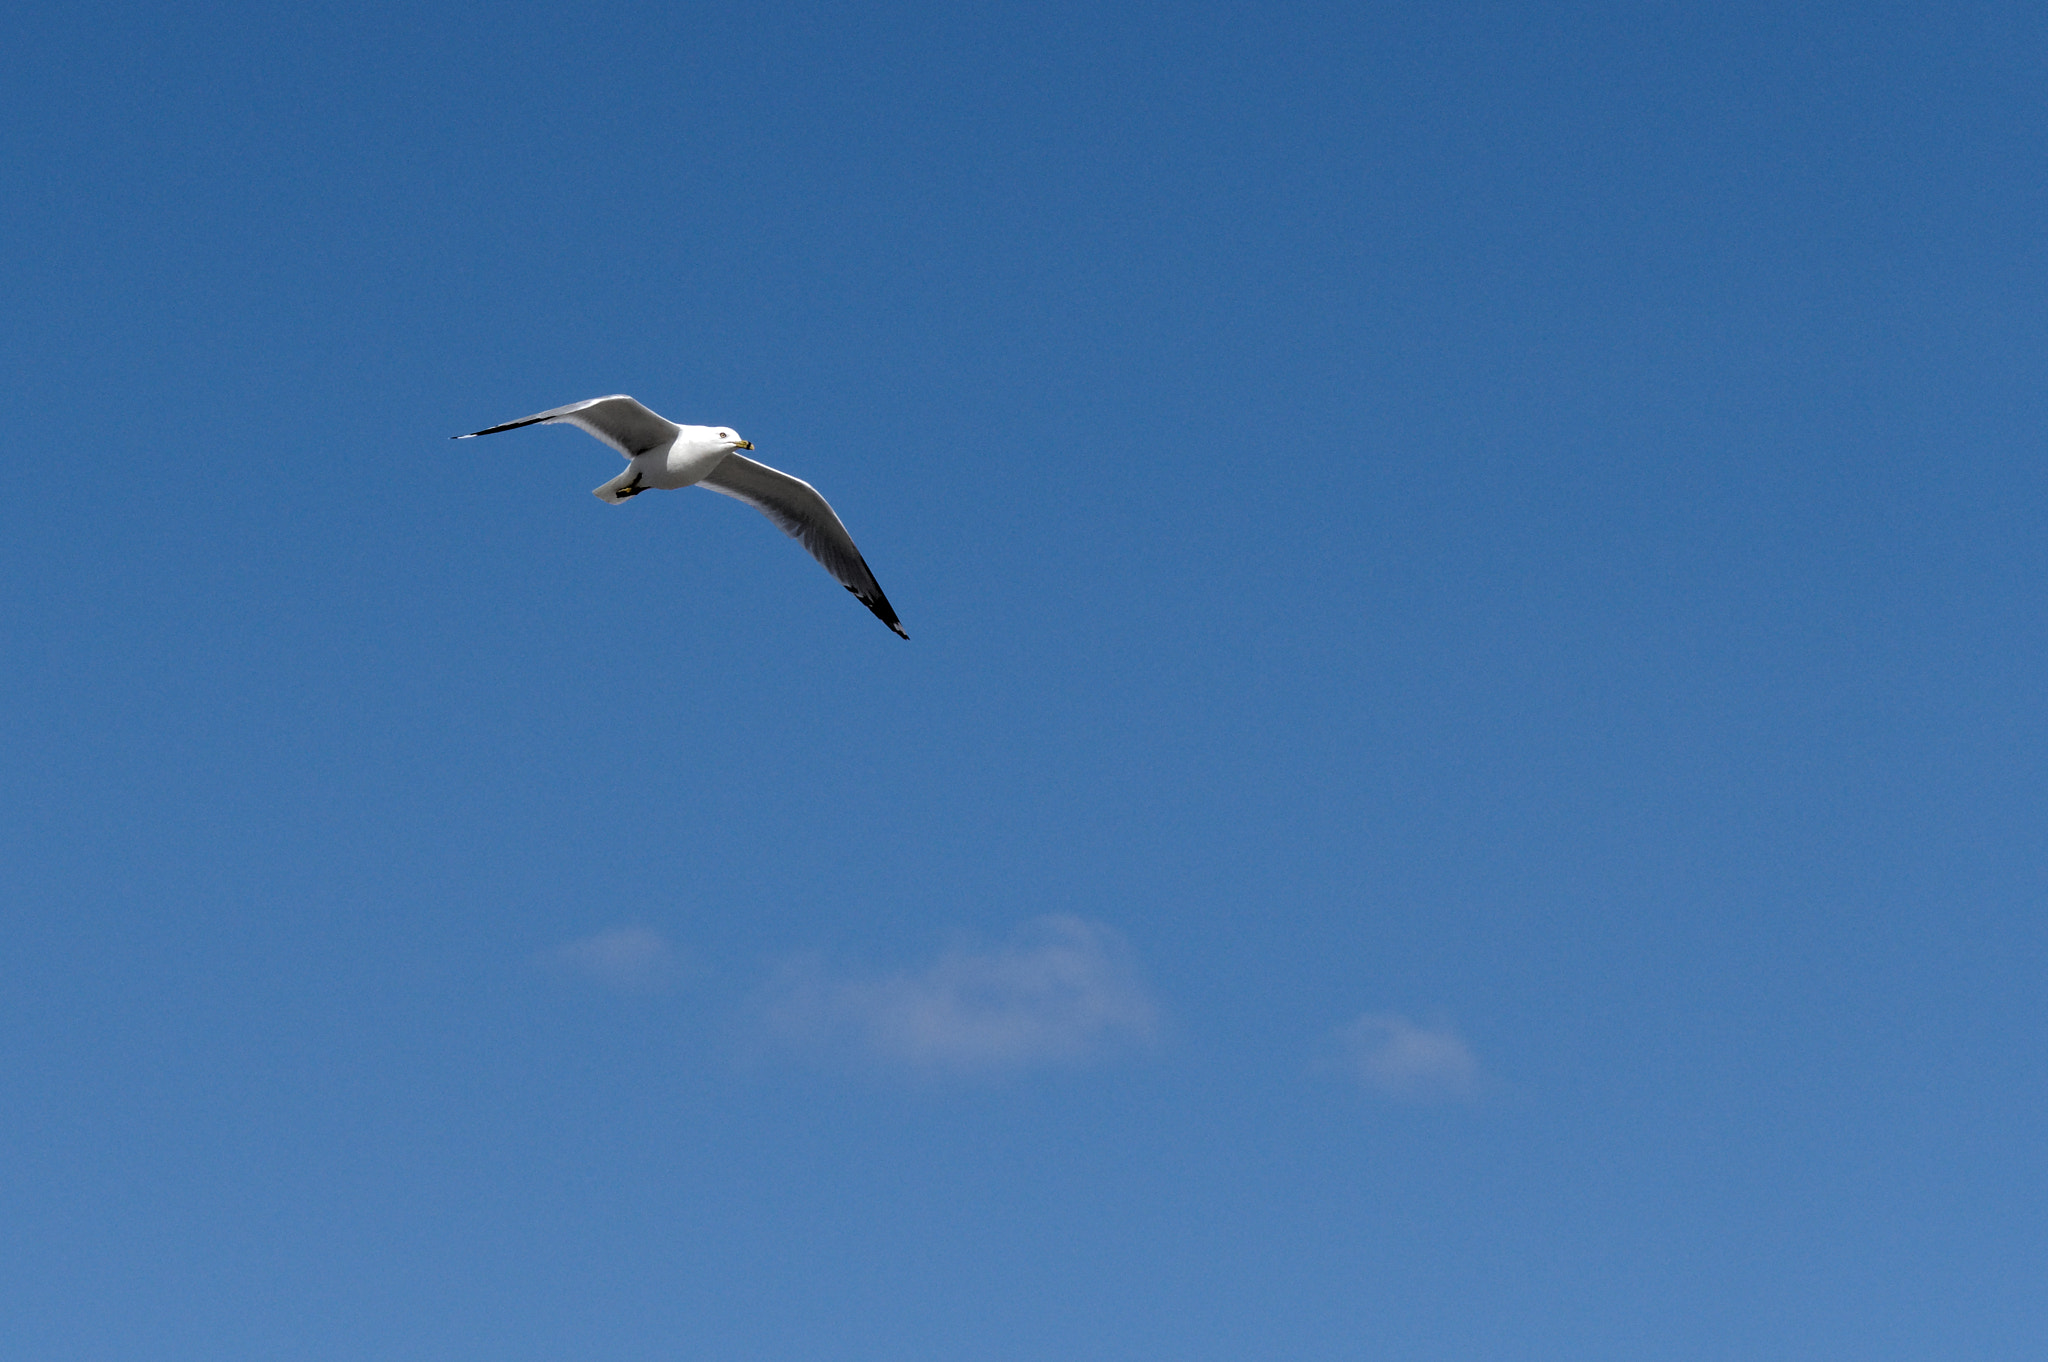 Pentax smc FA 77mm 1.8 Limited sample photo. Spring gull in flight 1 photography